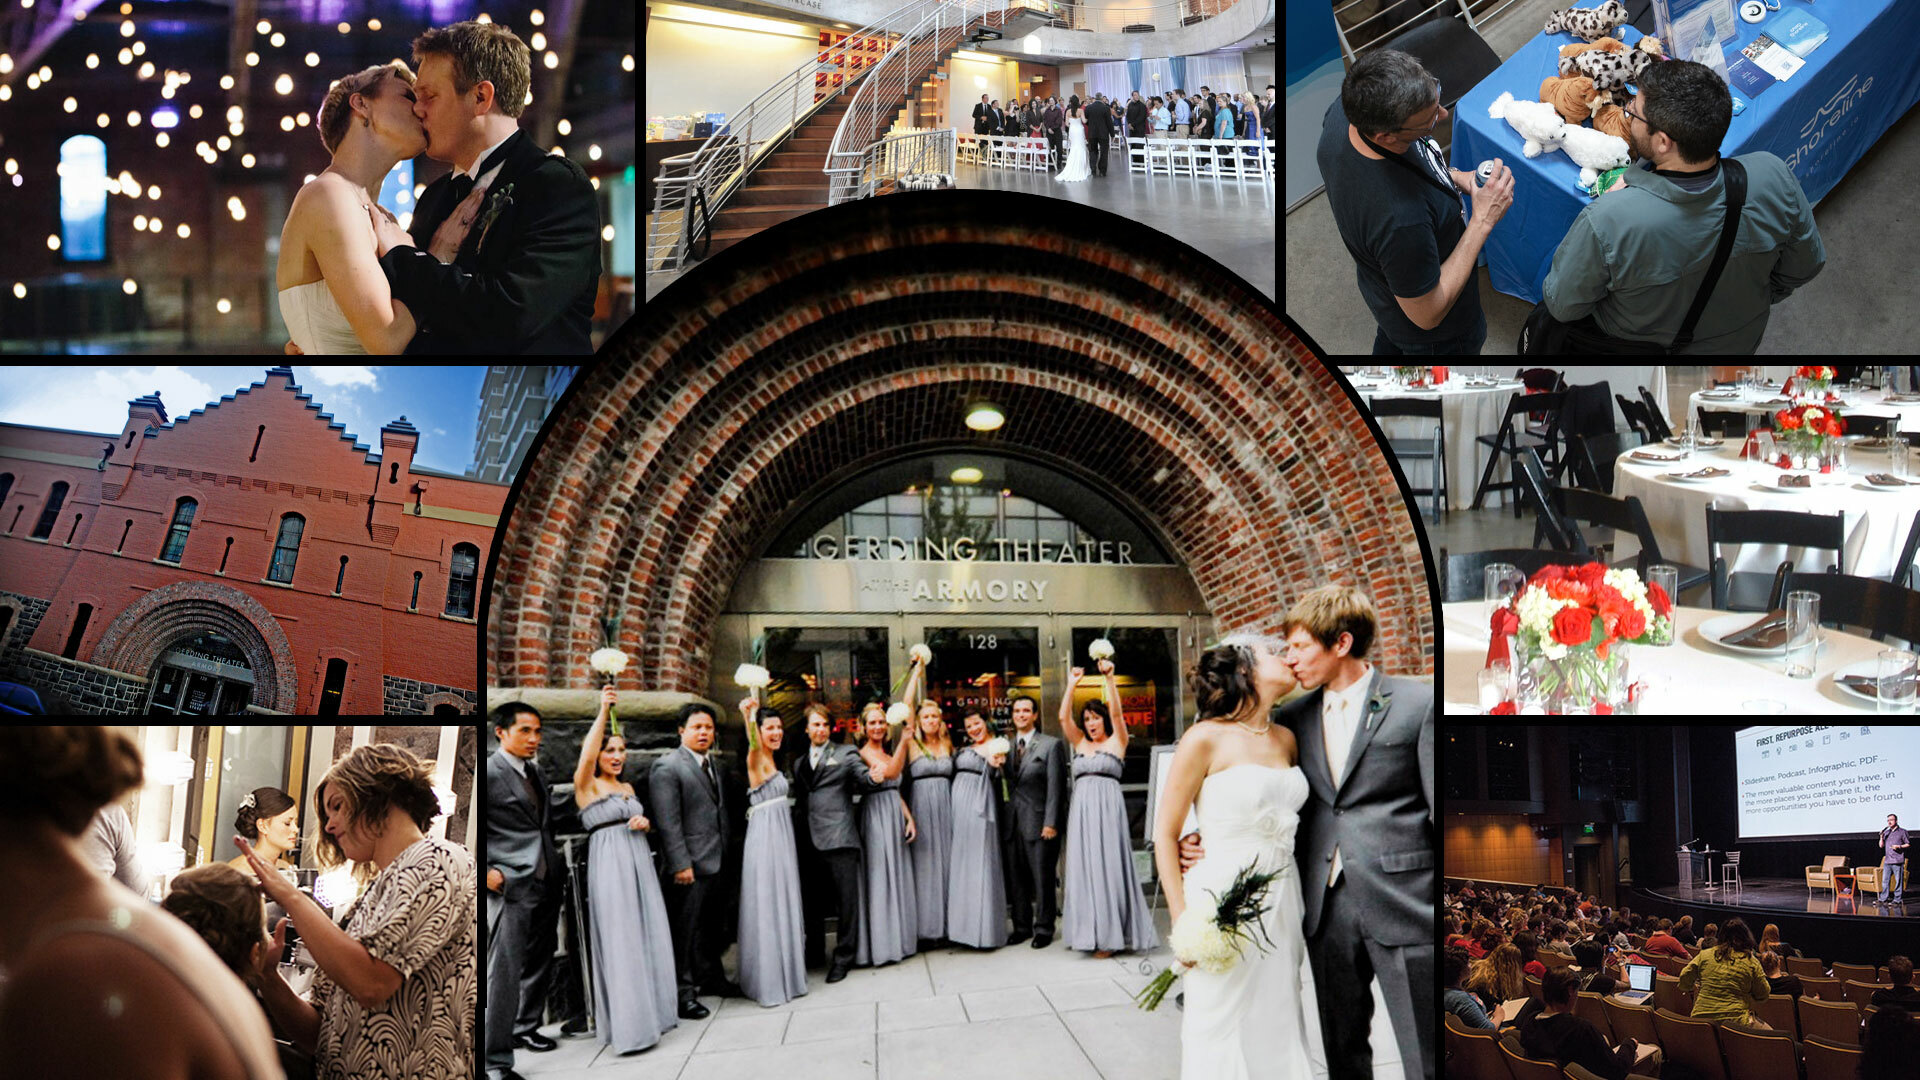 A bride and groom kiss in front of the main entrance to The Armory, framed by the brick archway over the doors.